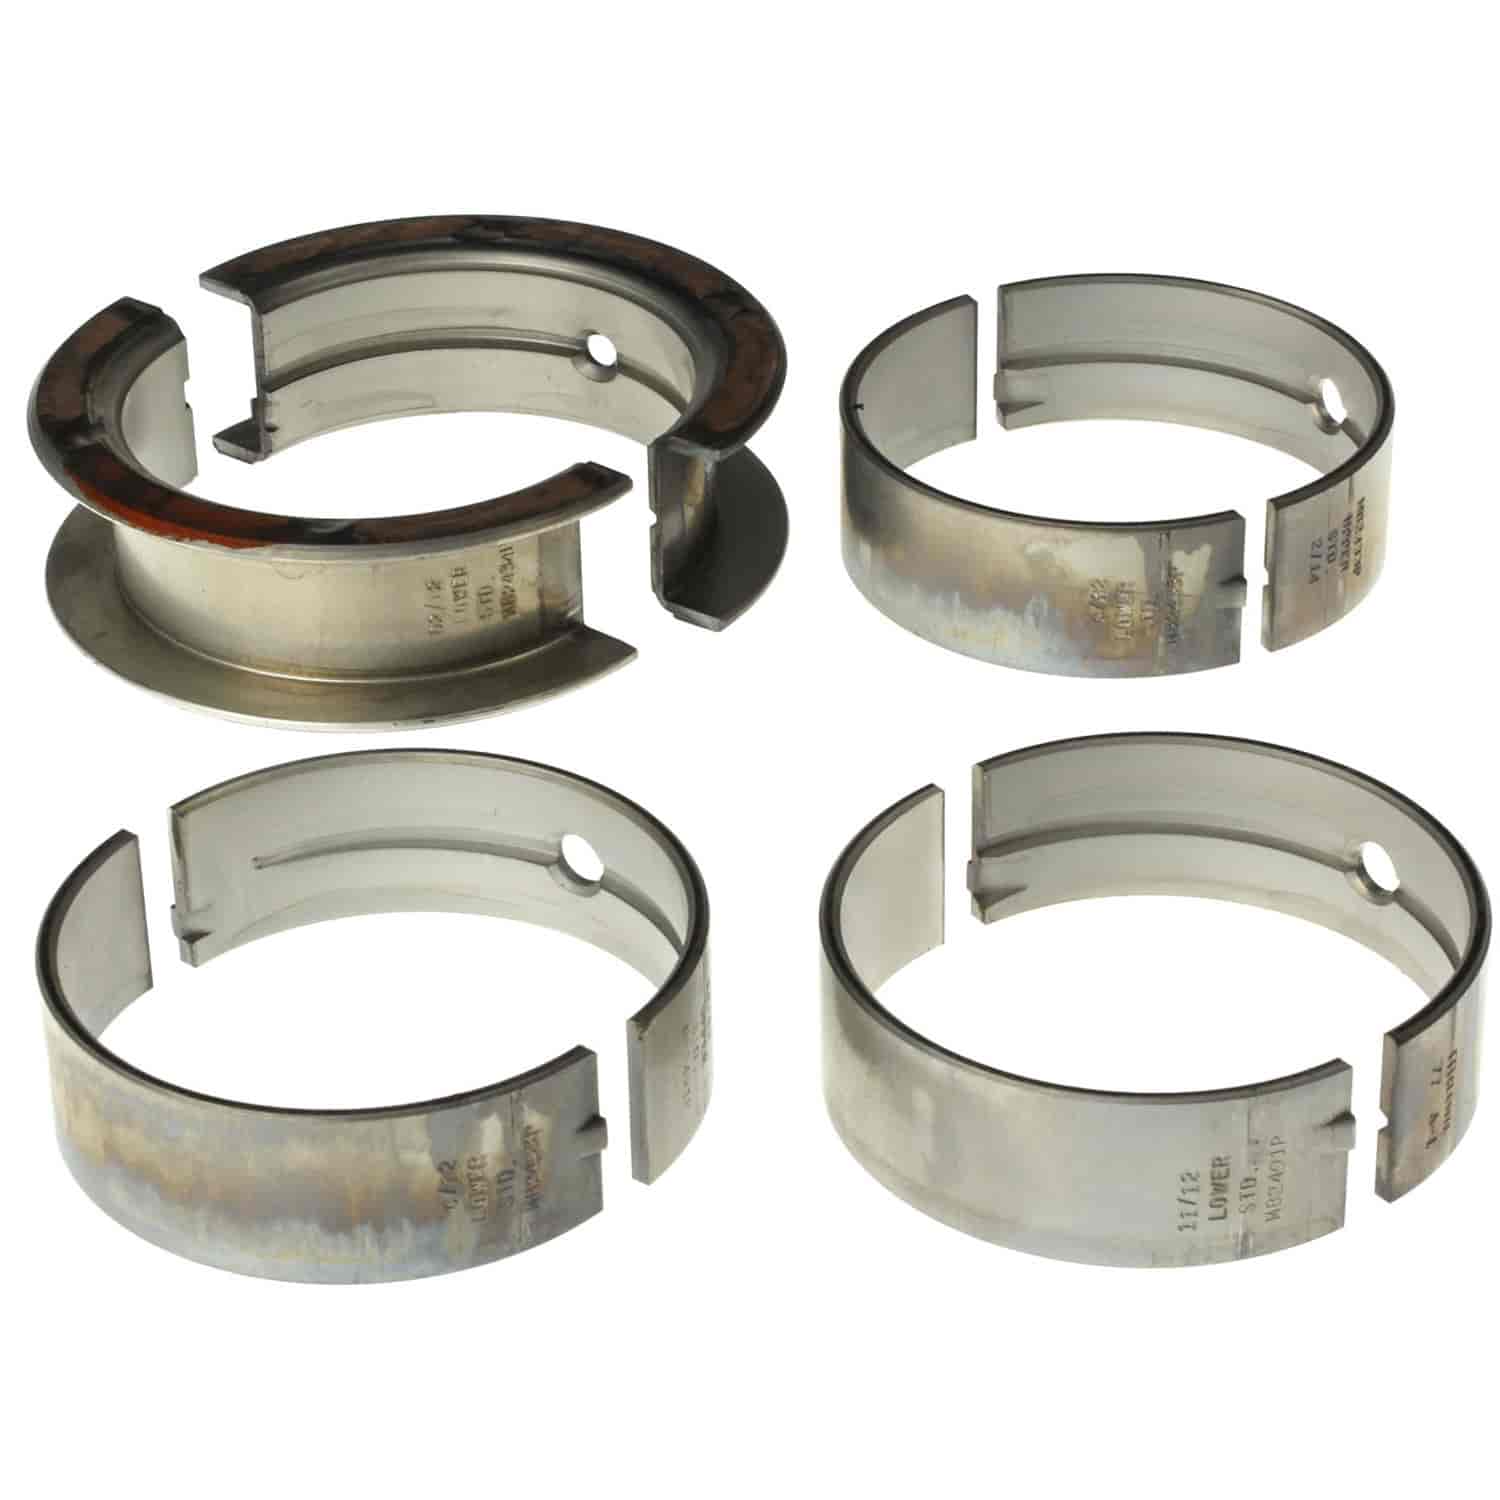 Main Bearing Set Chevy/Buick 1964-1990 V6 3.0/3.2/3.3/3.7/3.8/4.1L with Standard Size